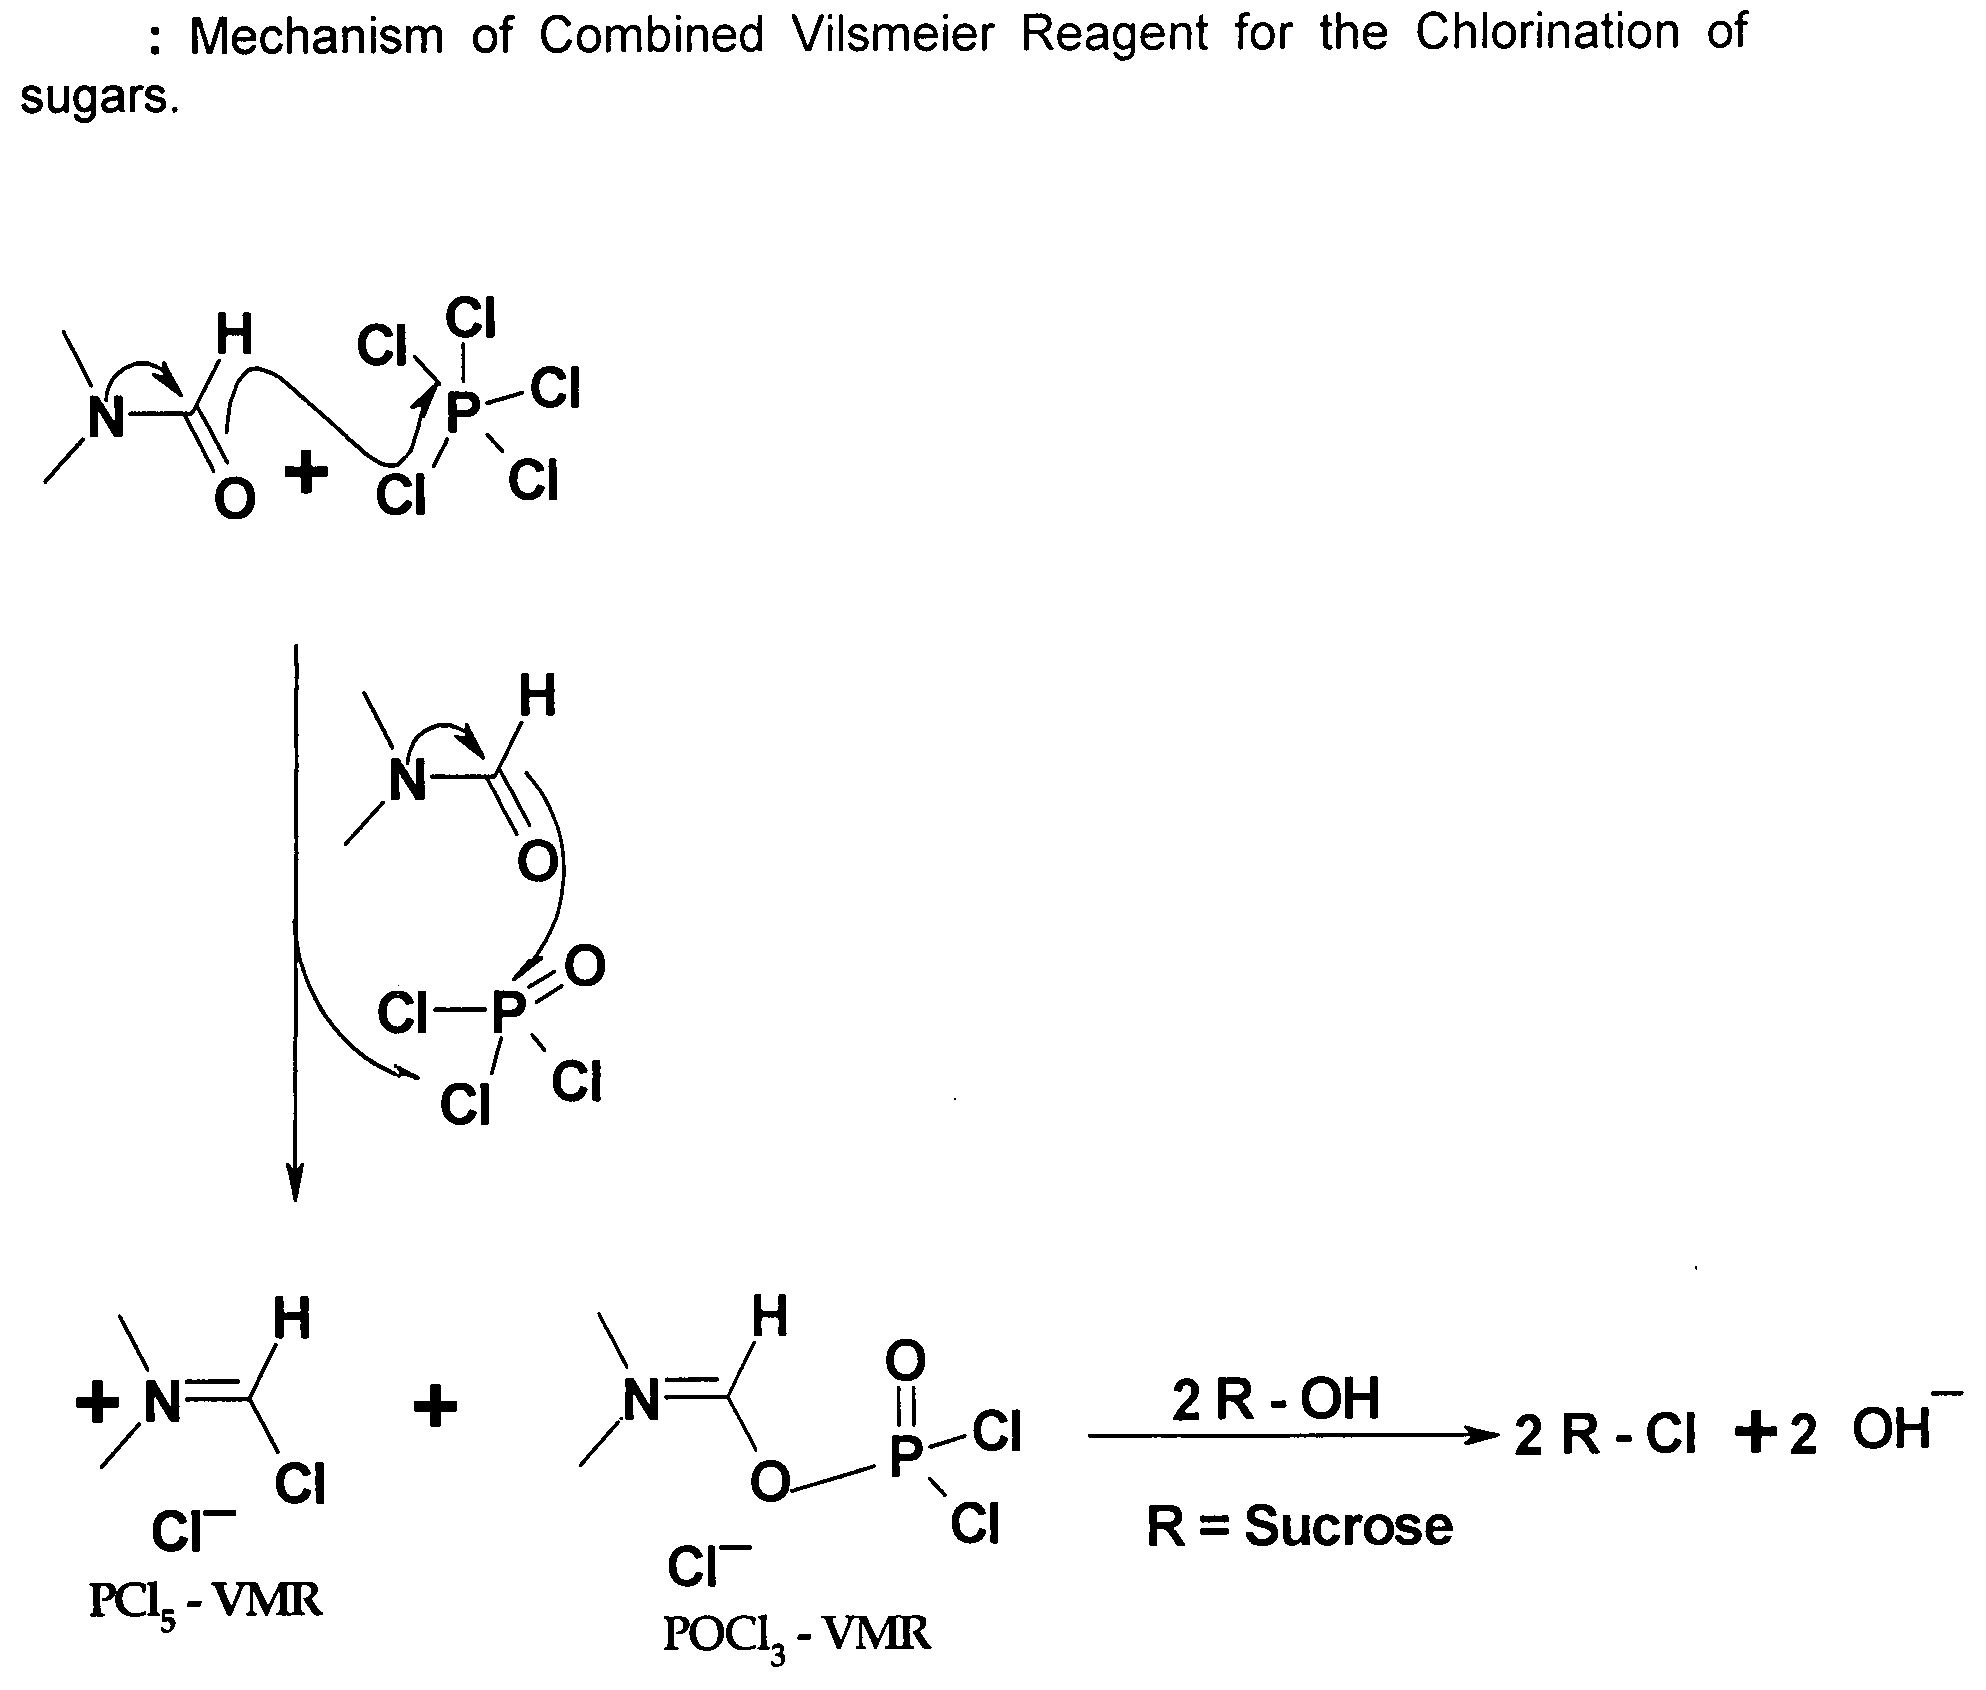 Generation of Phosphorus Oxychloride as by-Product from Phosphorus Pentachloride and DMF and its Use for Chlorination Reaction by Converting Into Vilsmeier-Haack Reagent